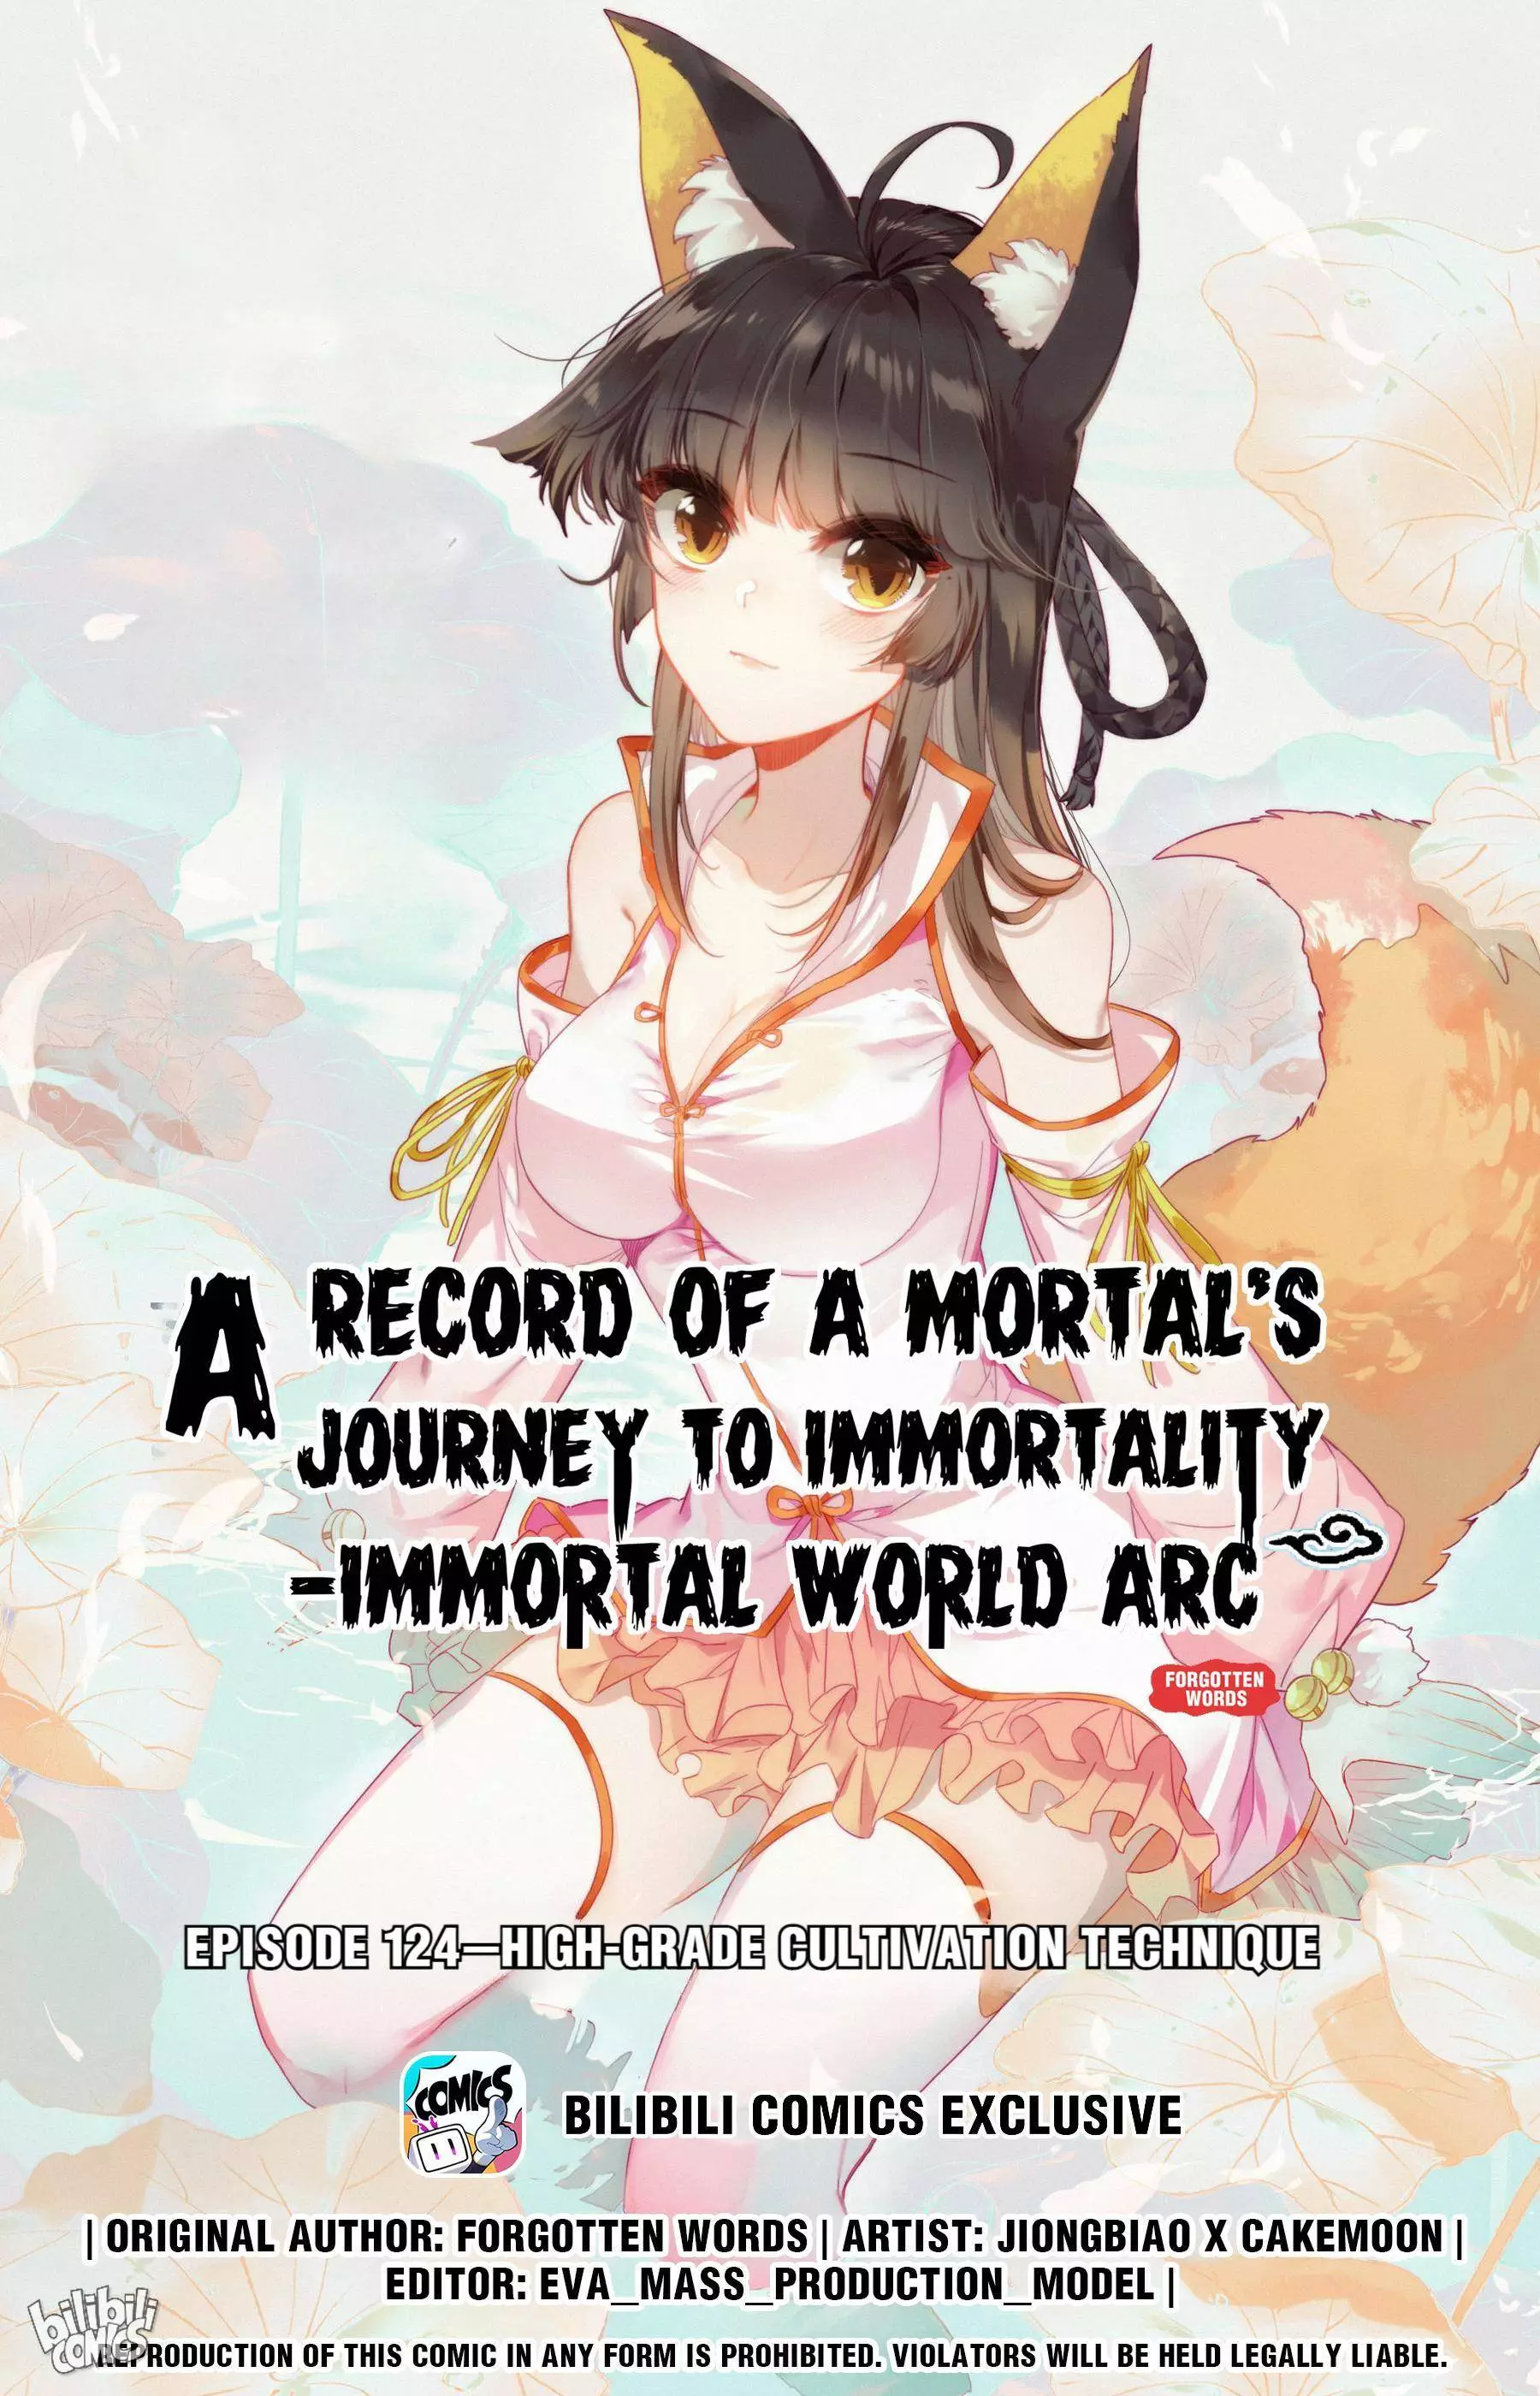 A Record Of A Mortal's Journey To Immortality—Immortal World Arc - 124 page 1-8538d00d